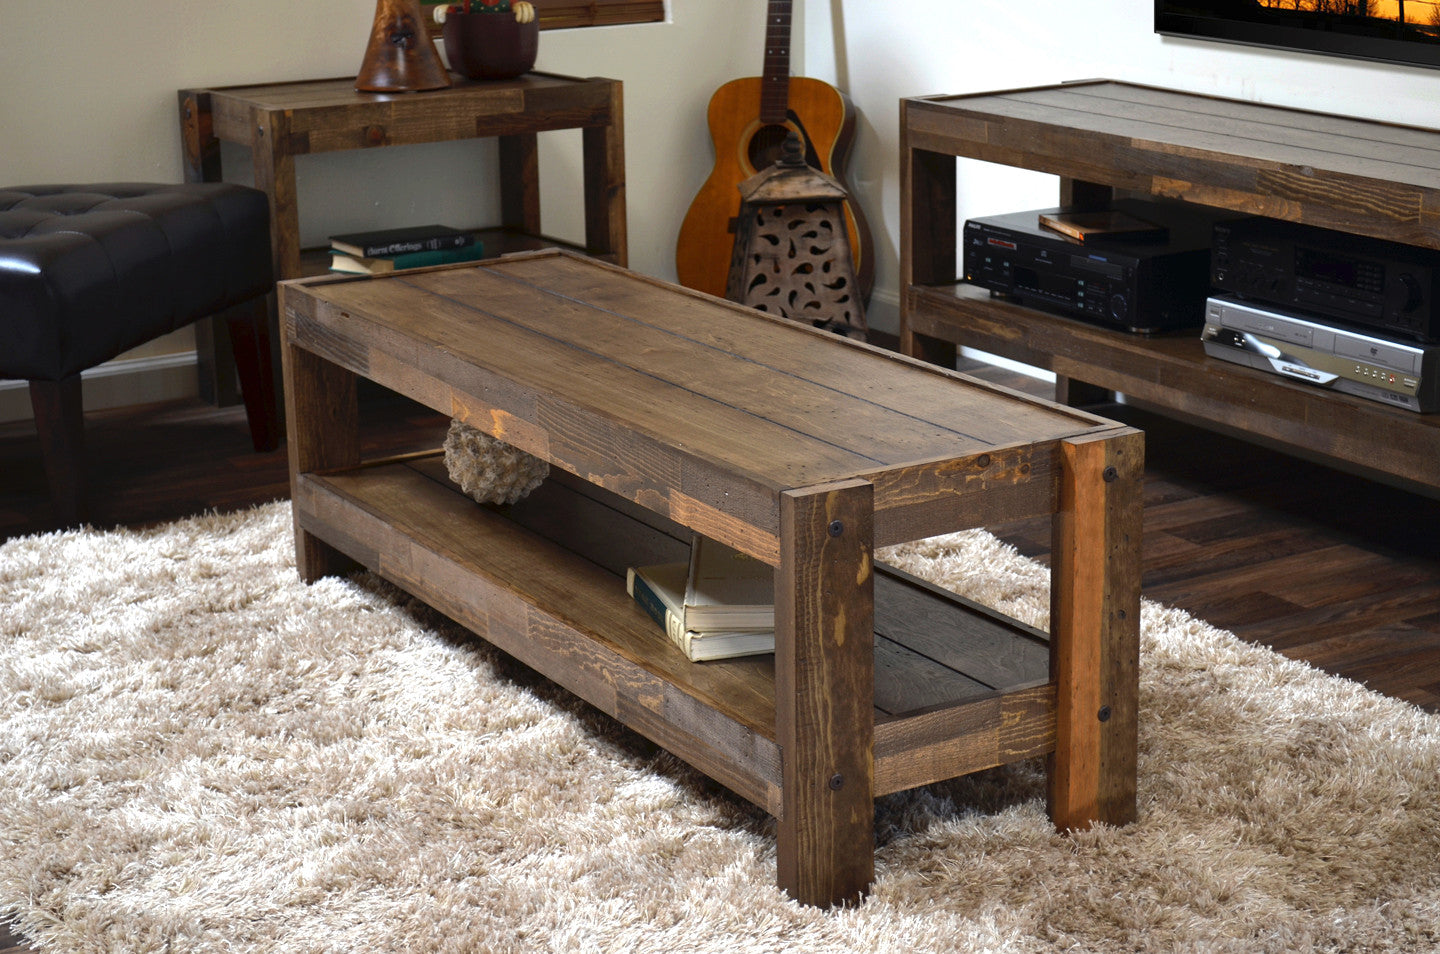 Modern Entertainment Centers - Woodwaves - Reclaimed Entertainment Wall & Coffee Table - presEARTH Spice